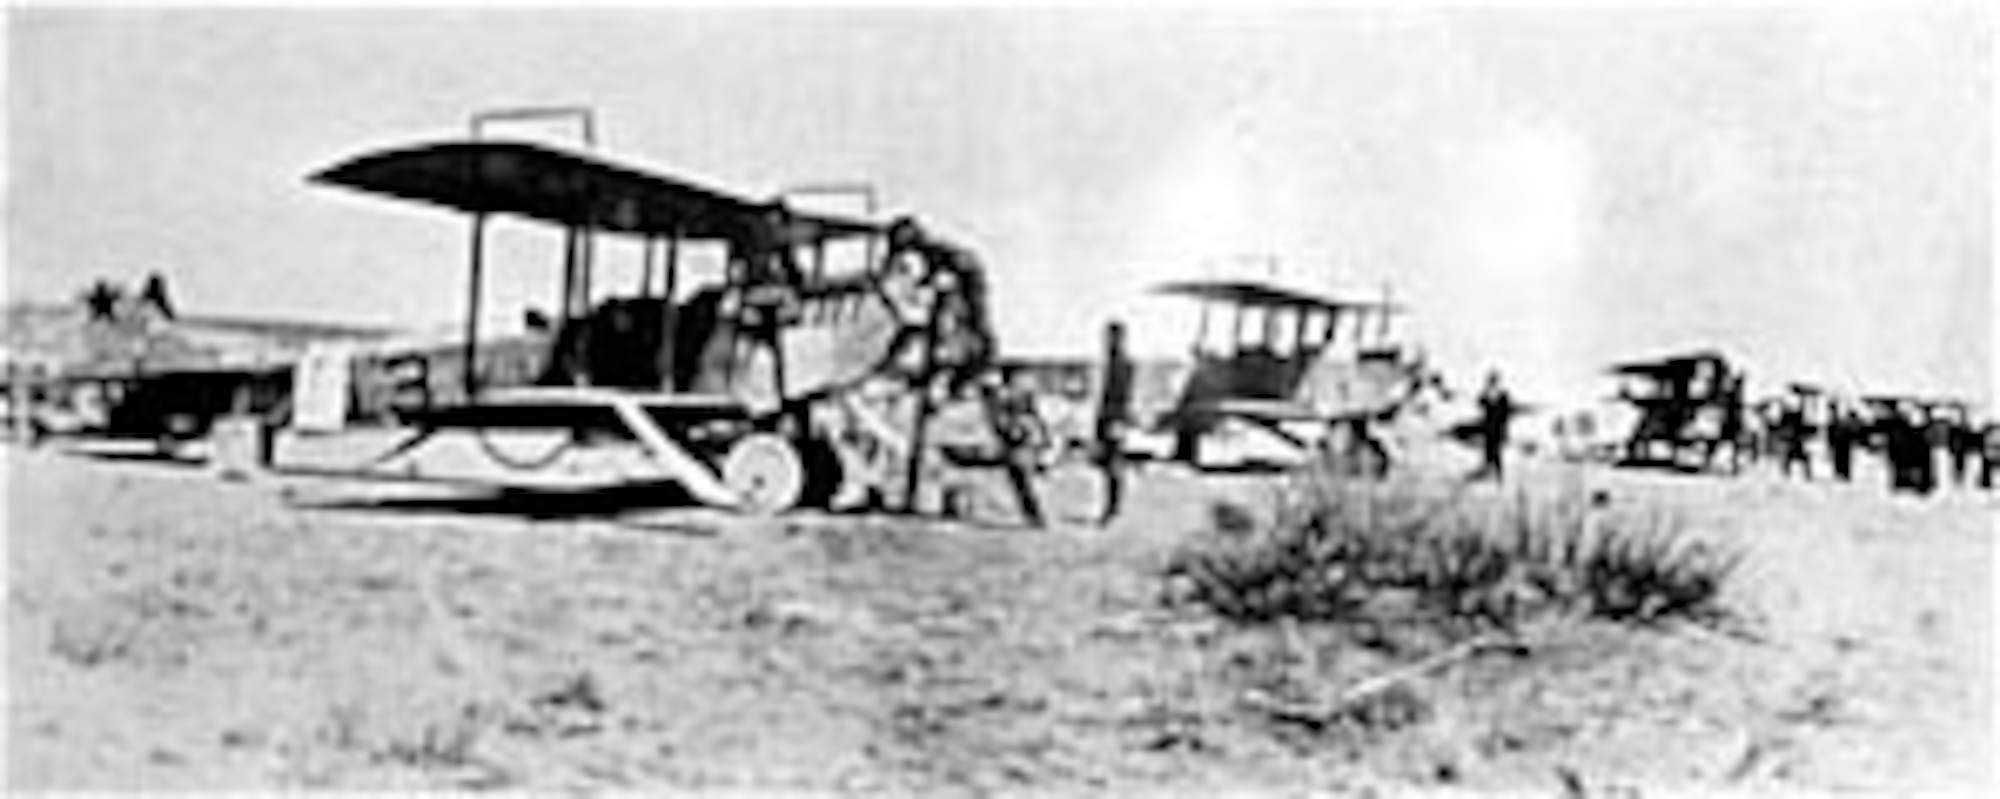 Curtiss JN-3 airplanes used in Mexico. (U.S. Air Force photo)